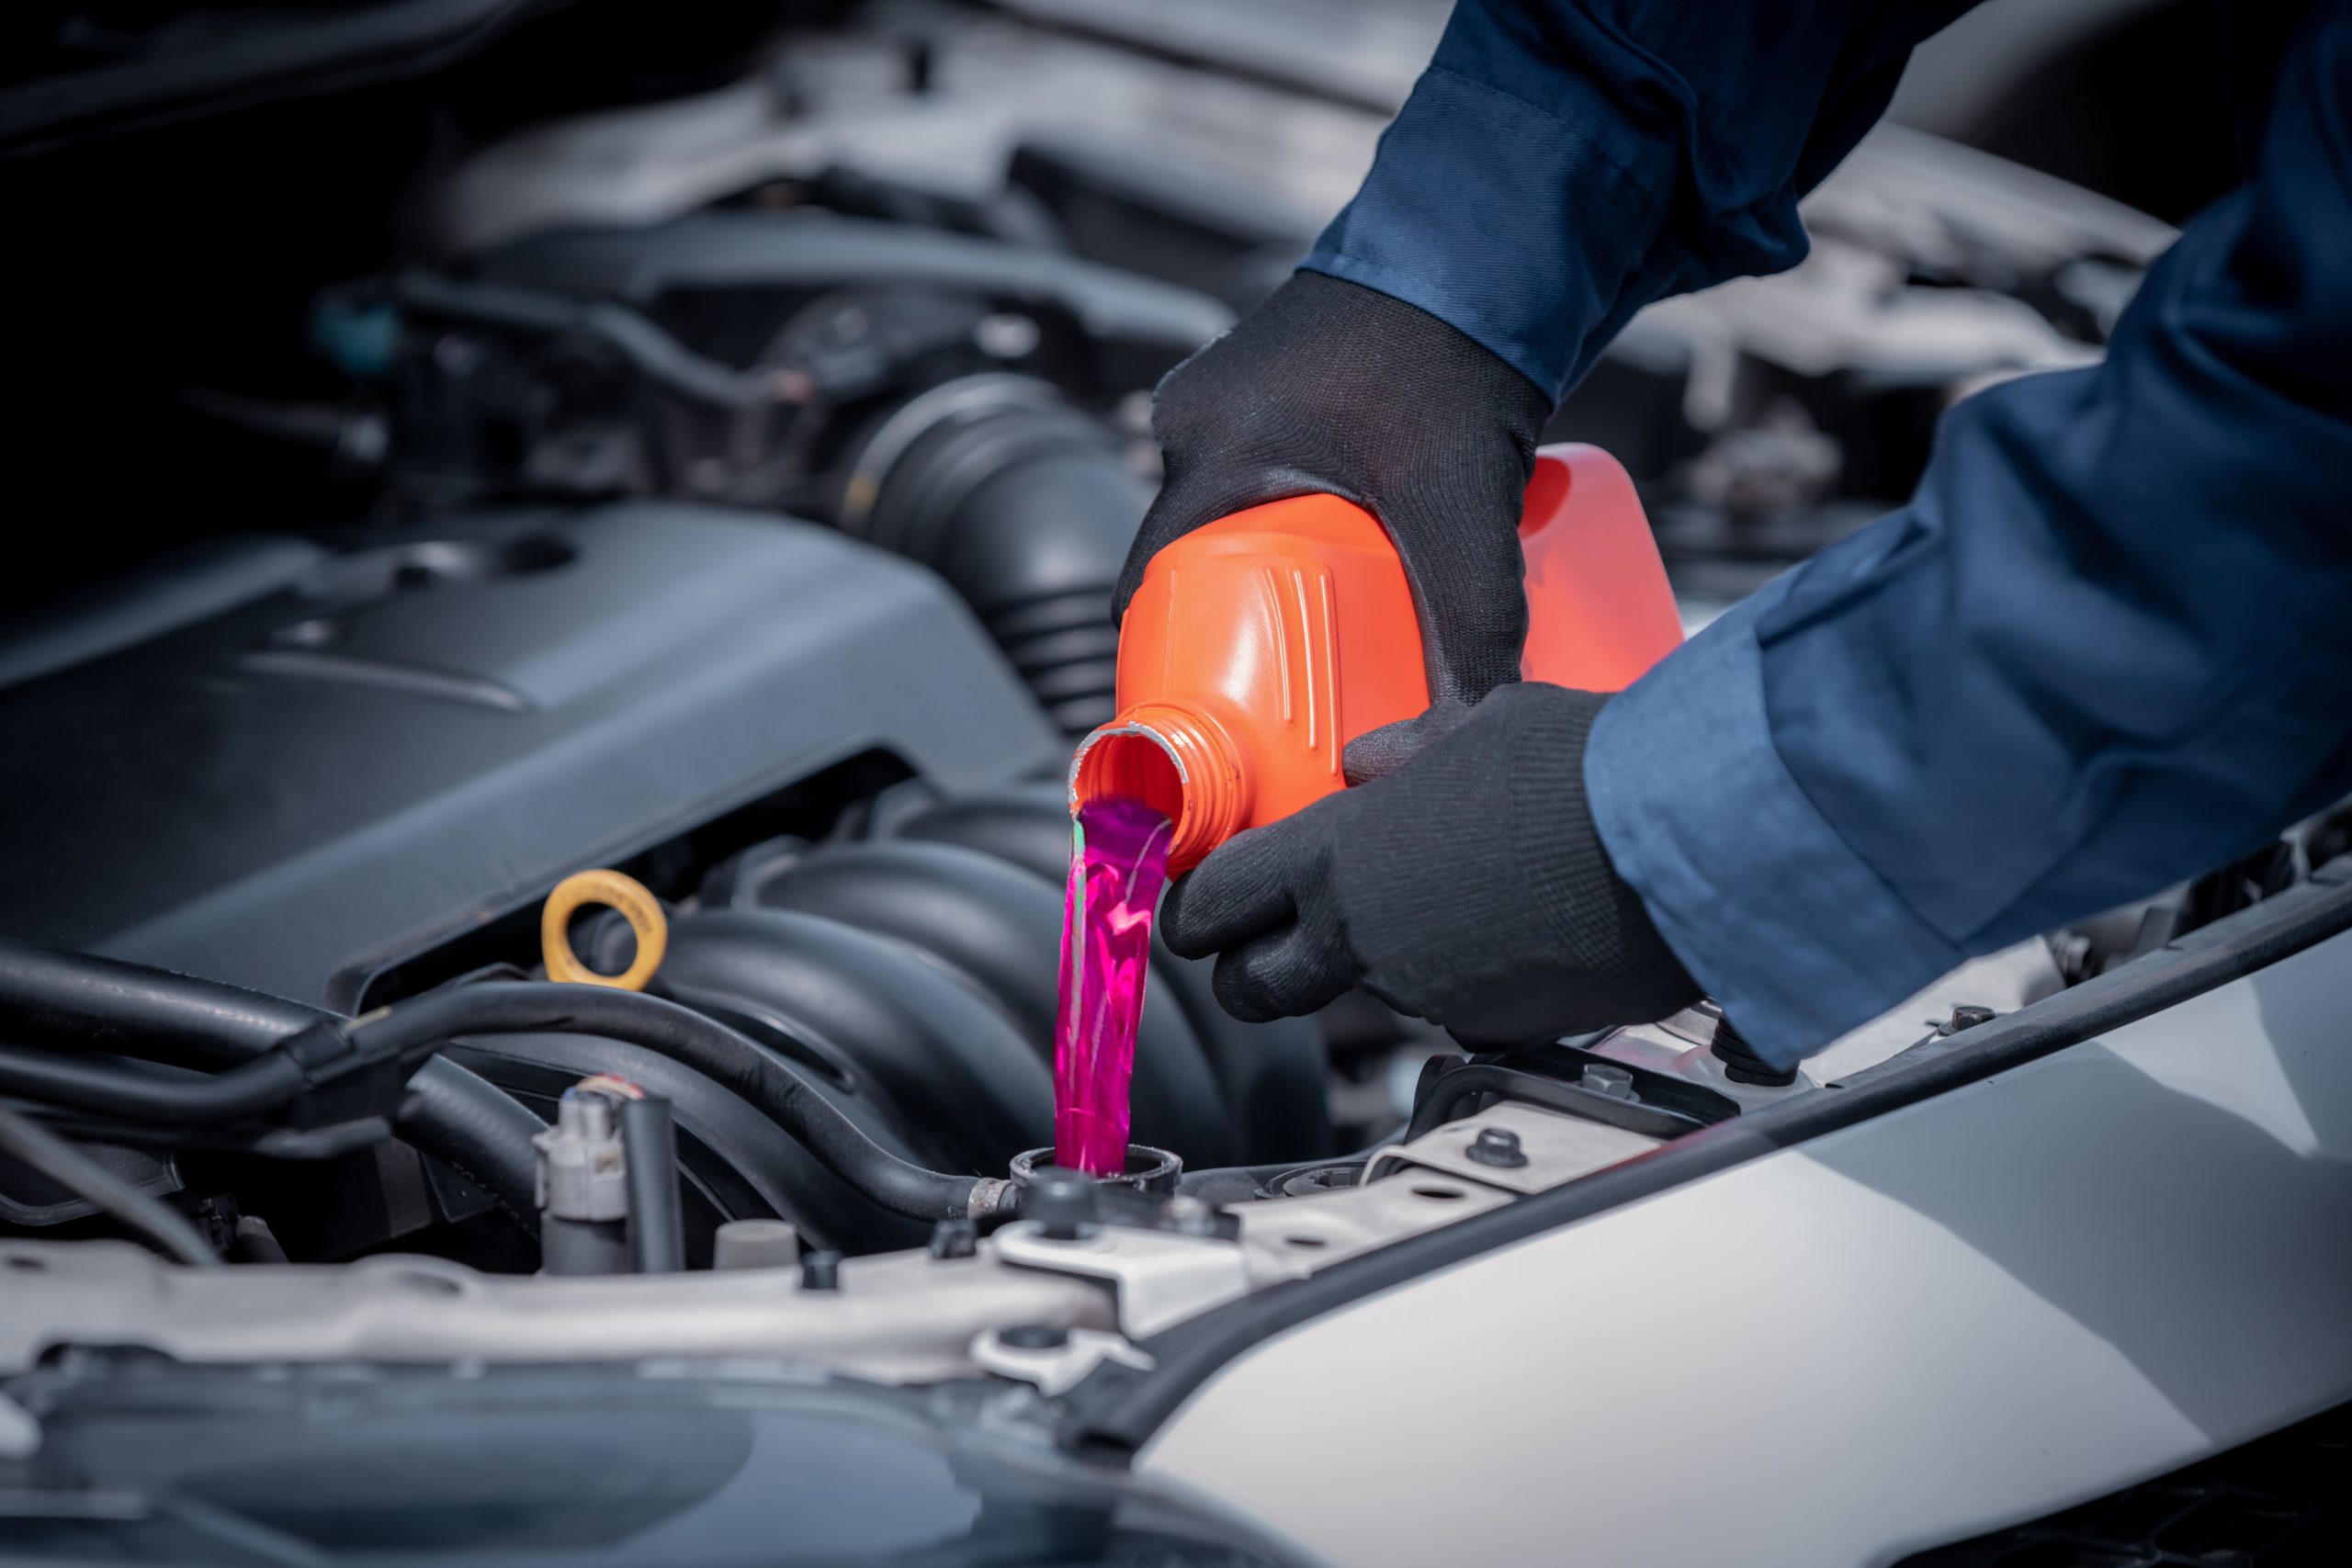 How Can You Tell When Your Car Needs Antifreeze?